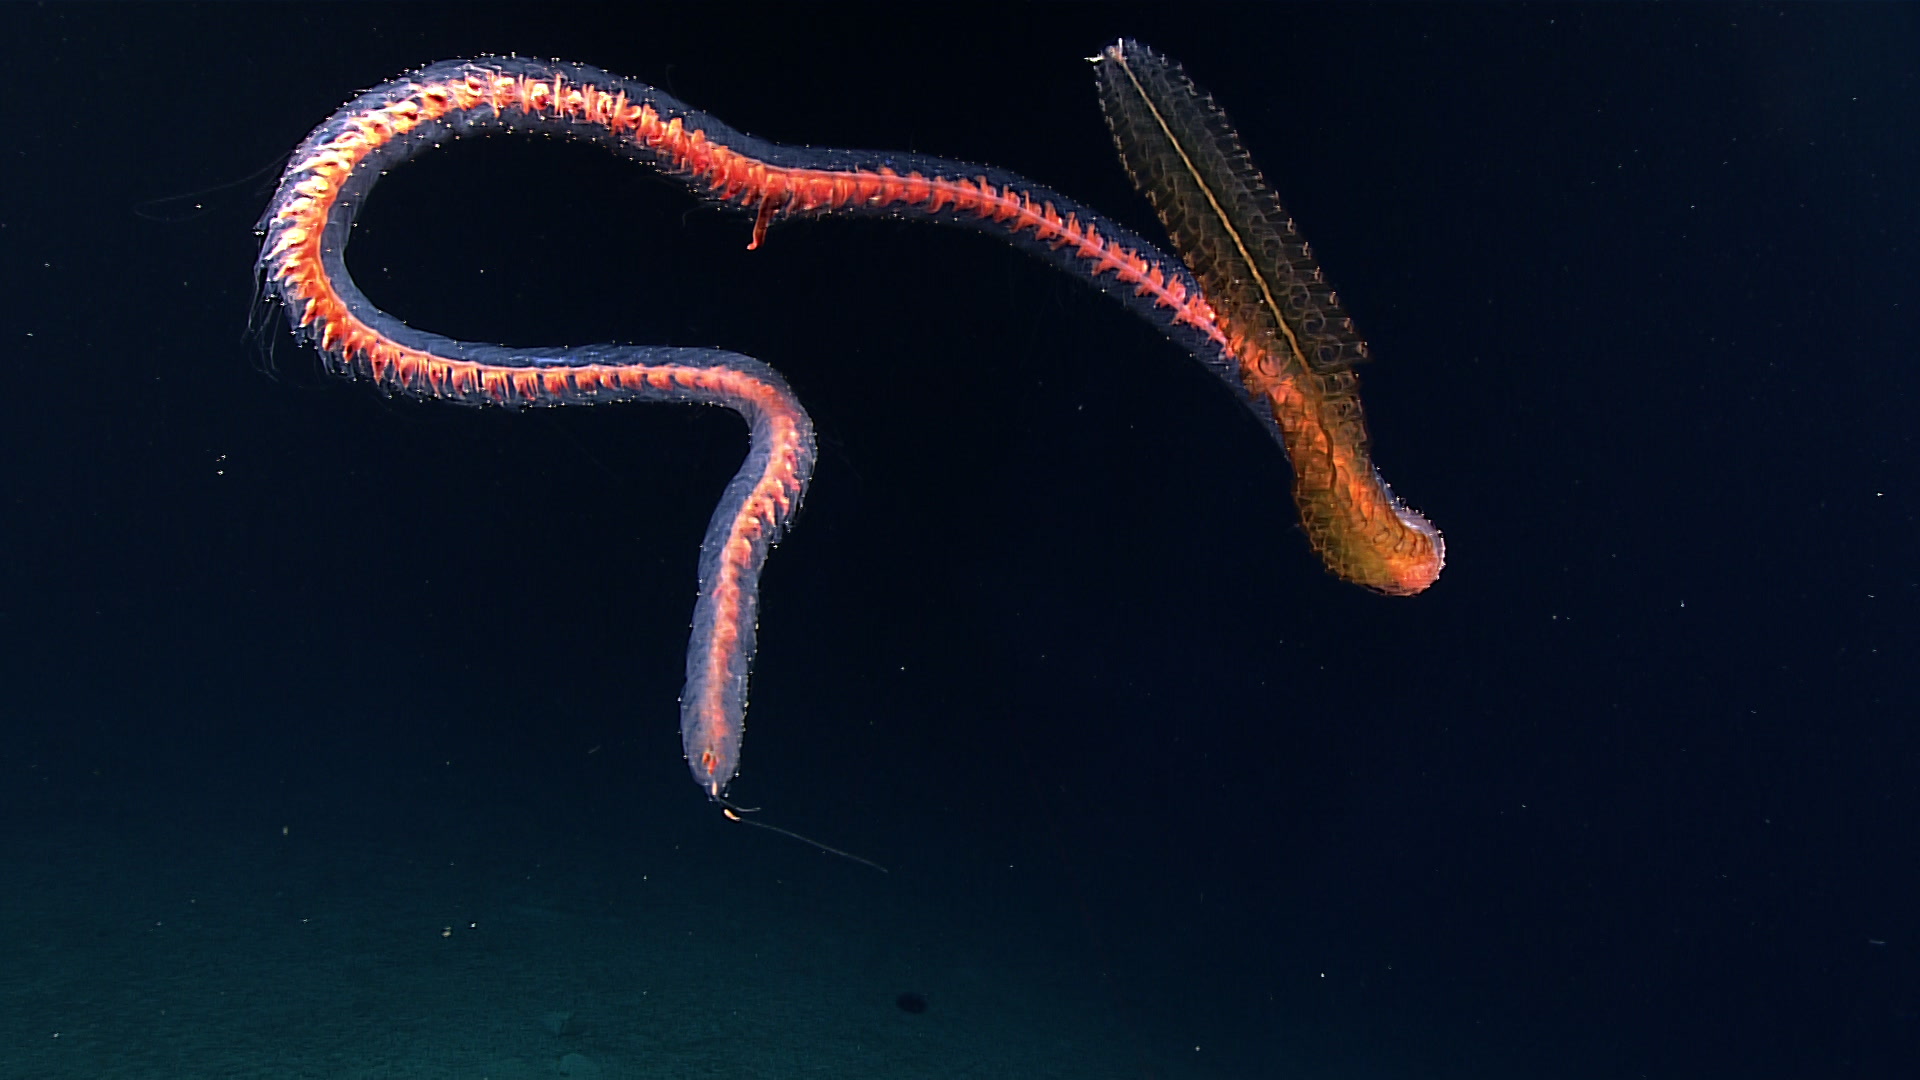 Most siphonophores are long and almost rope-like in appearance, with individual zooids arranged on a long “stem.” This siphonophore, observed while exploring the Winslow Reef Complex in the Pacific Ocean, has a pinkish internal system visible through clear external tissues. It was largely intact and in good shape, which is unusual as these animals are so delicate that we often observe them in pieces.